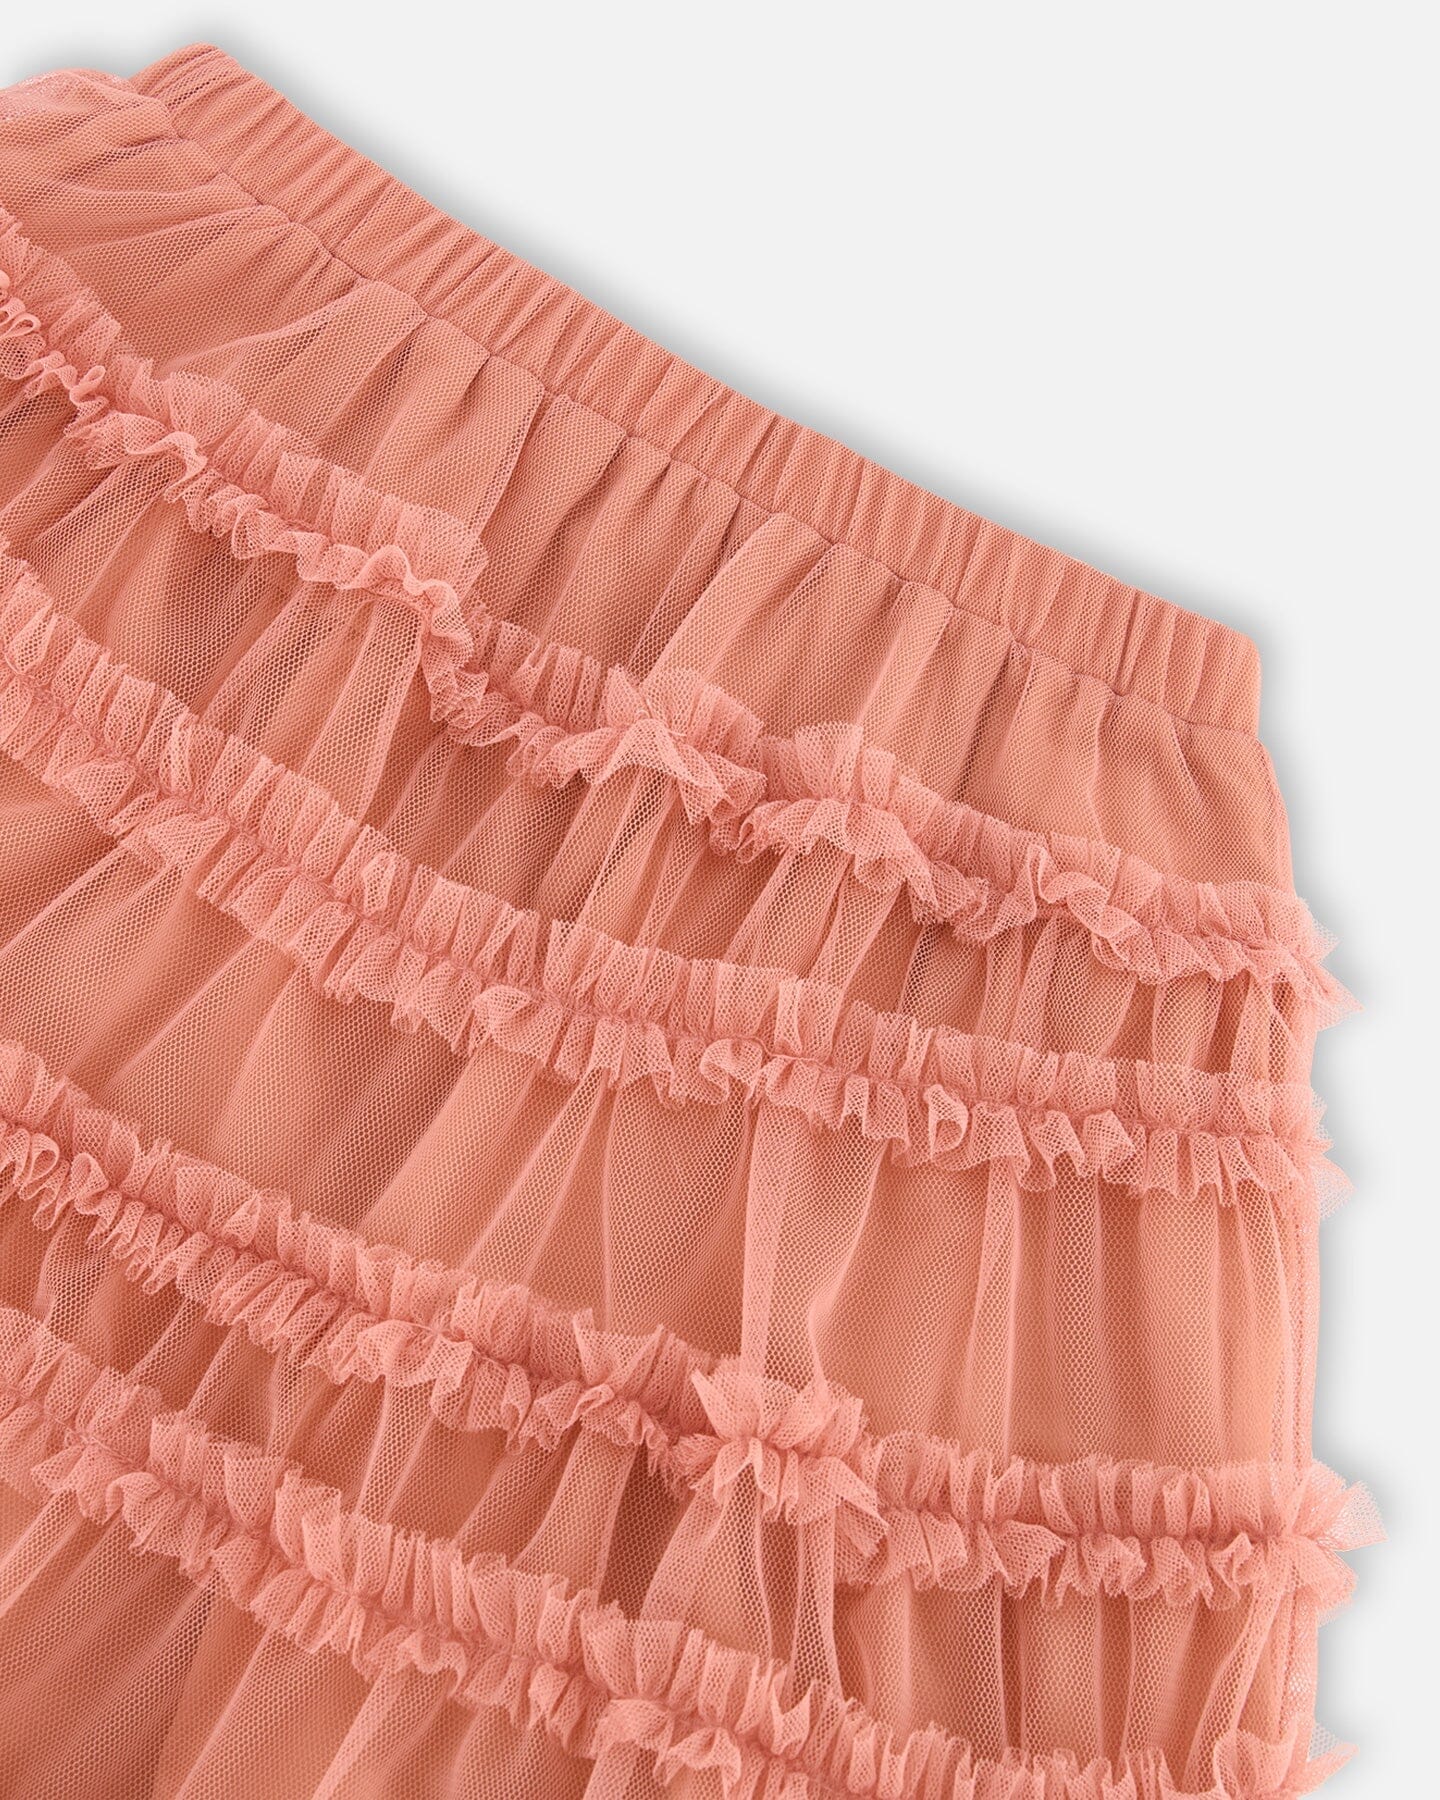 Ash Rose Tiered Mid-Calf Skirt